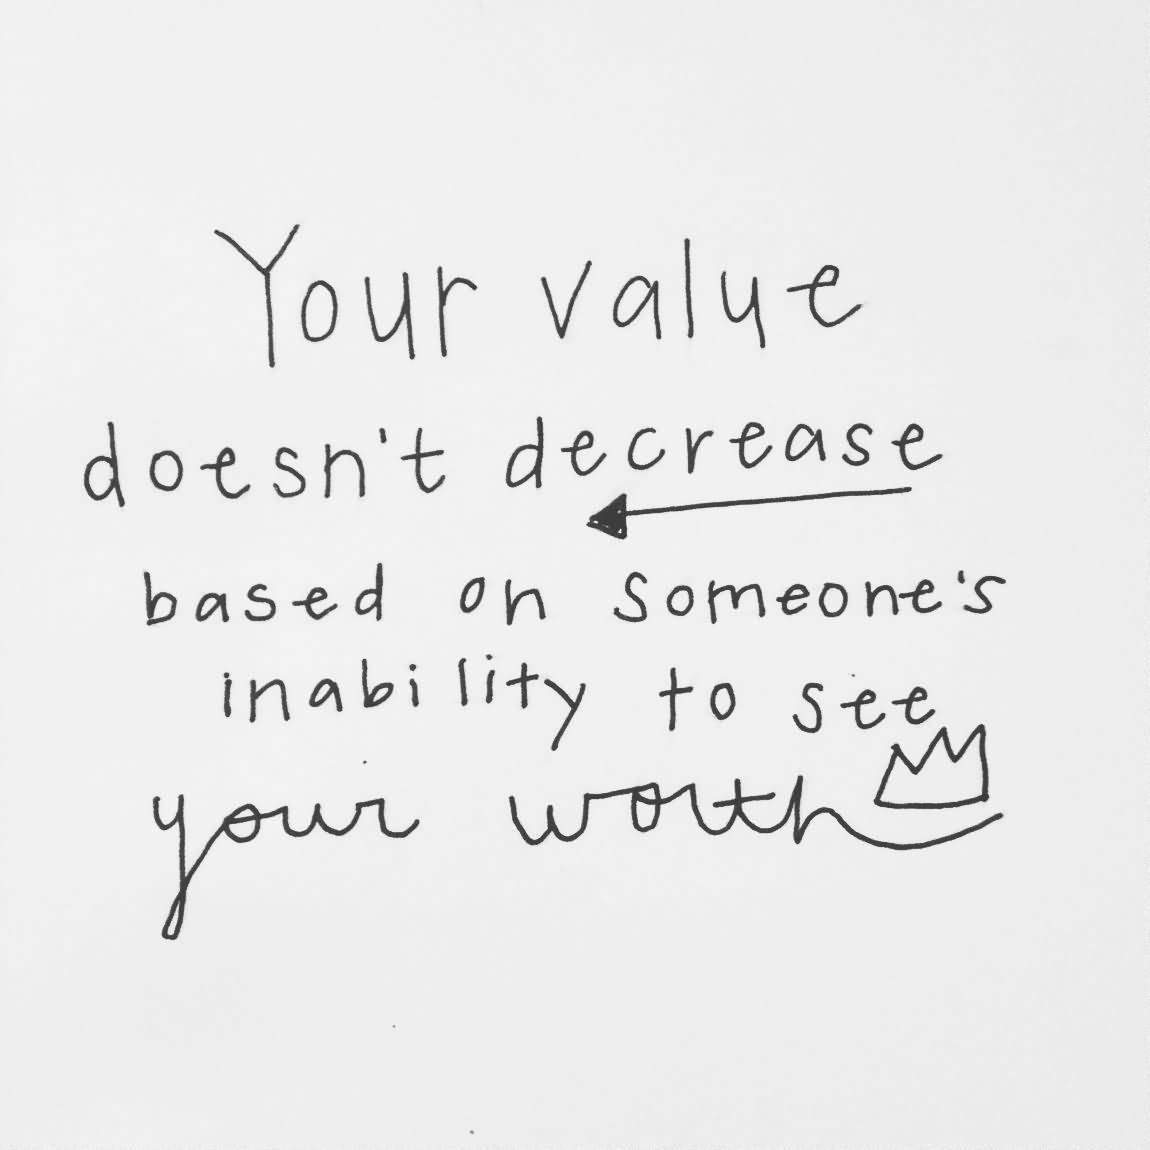 Your Value Doesn't Decrease Based On Someone's Inability To See Your Worth